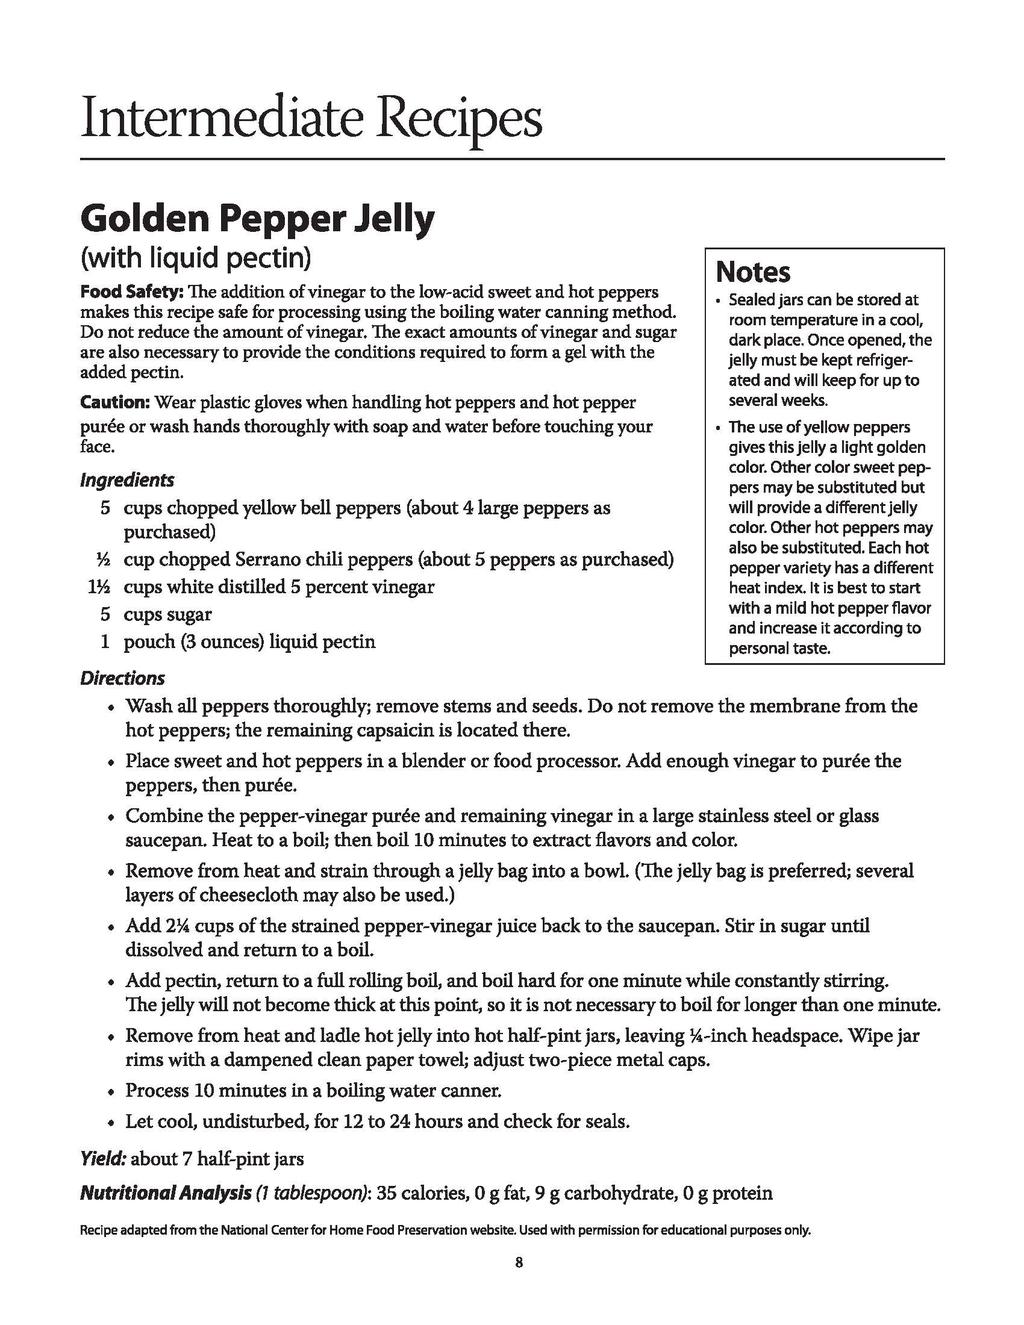 Intermediate Recipes Golden Pepper Jelly (with liquid pectin) Food Safety: The addition of vinegar to the low-acid sweet and hot peppers makes this recipe safe for processing using the boiling water